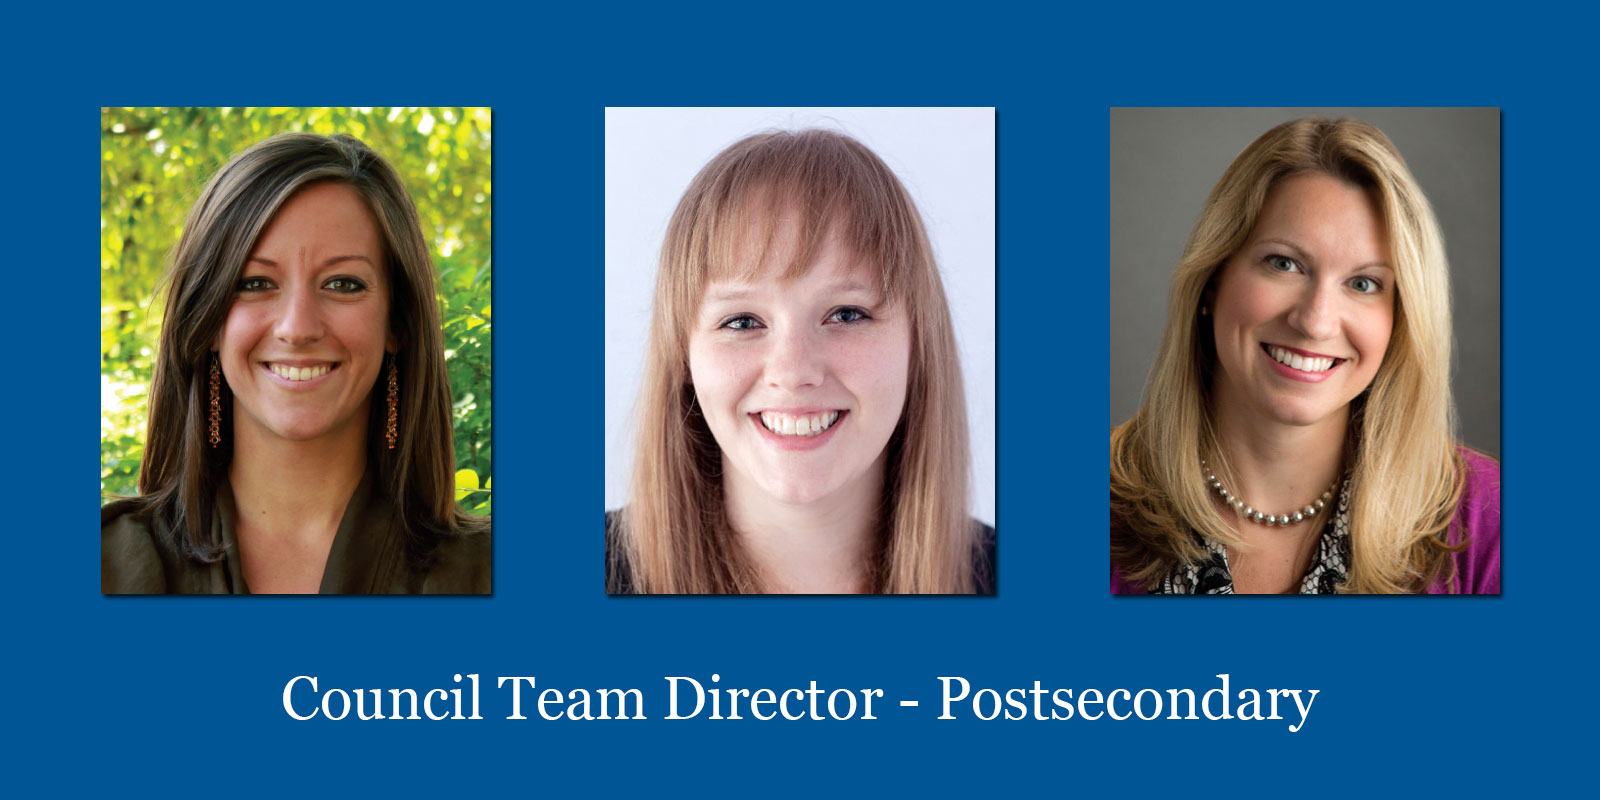 Candidates For Council Team Director – Postsecondary 2015-2016